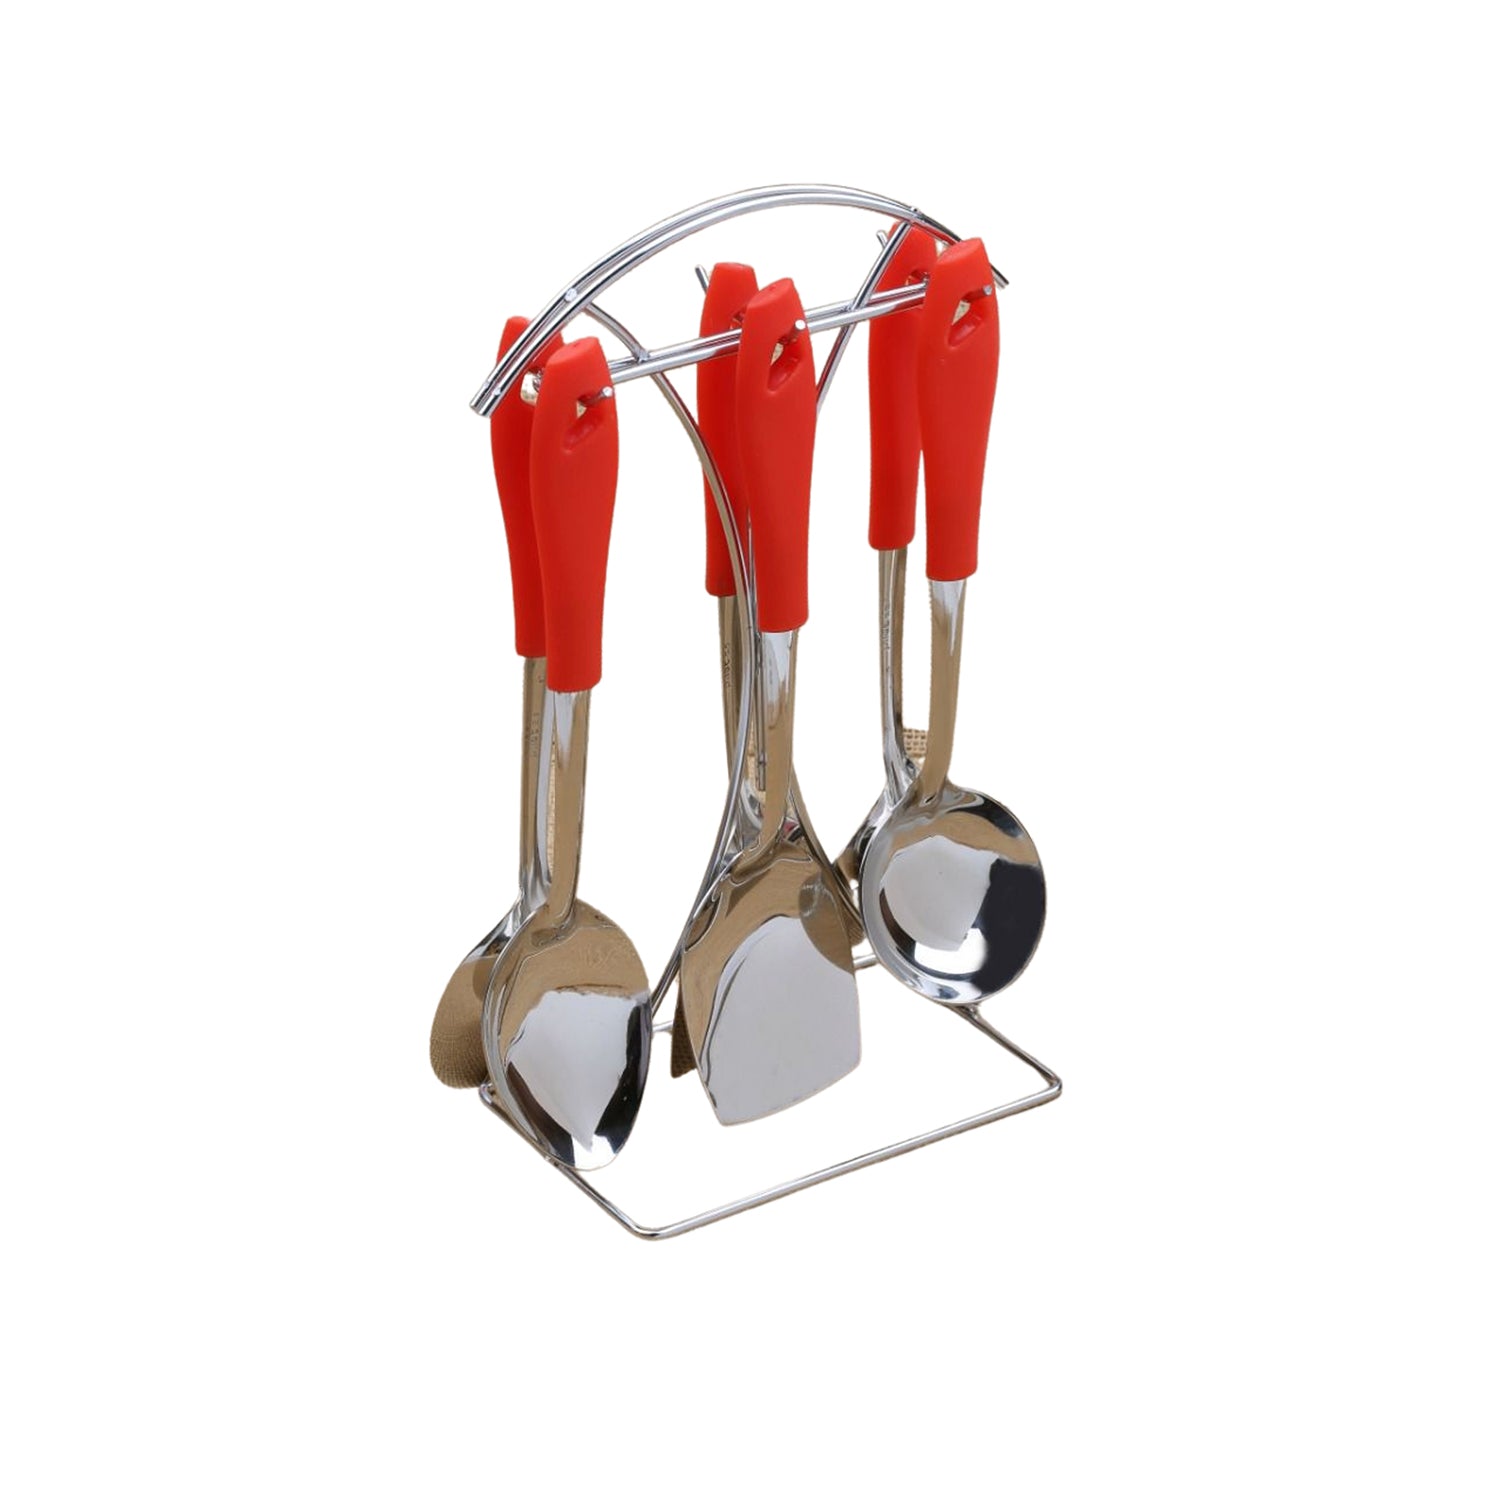 2701 6 Pc SS Serving Spoon stand used in all kinds of household and kitchen places for holding spoons etc. Dukandaily